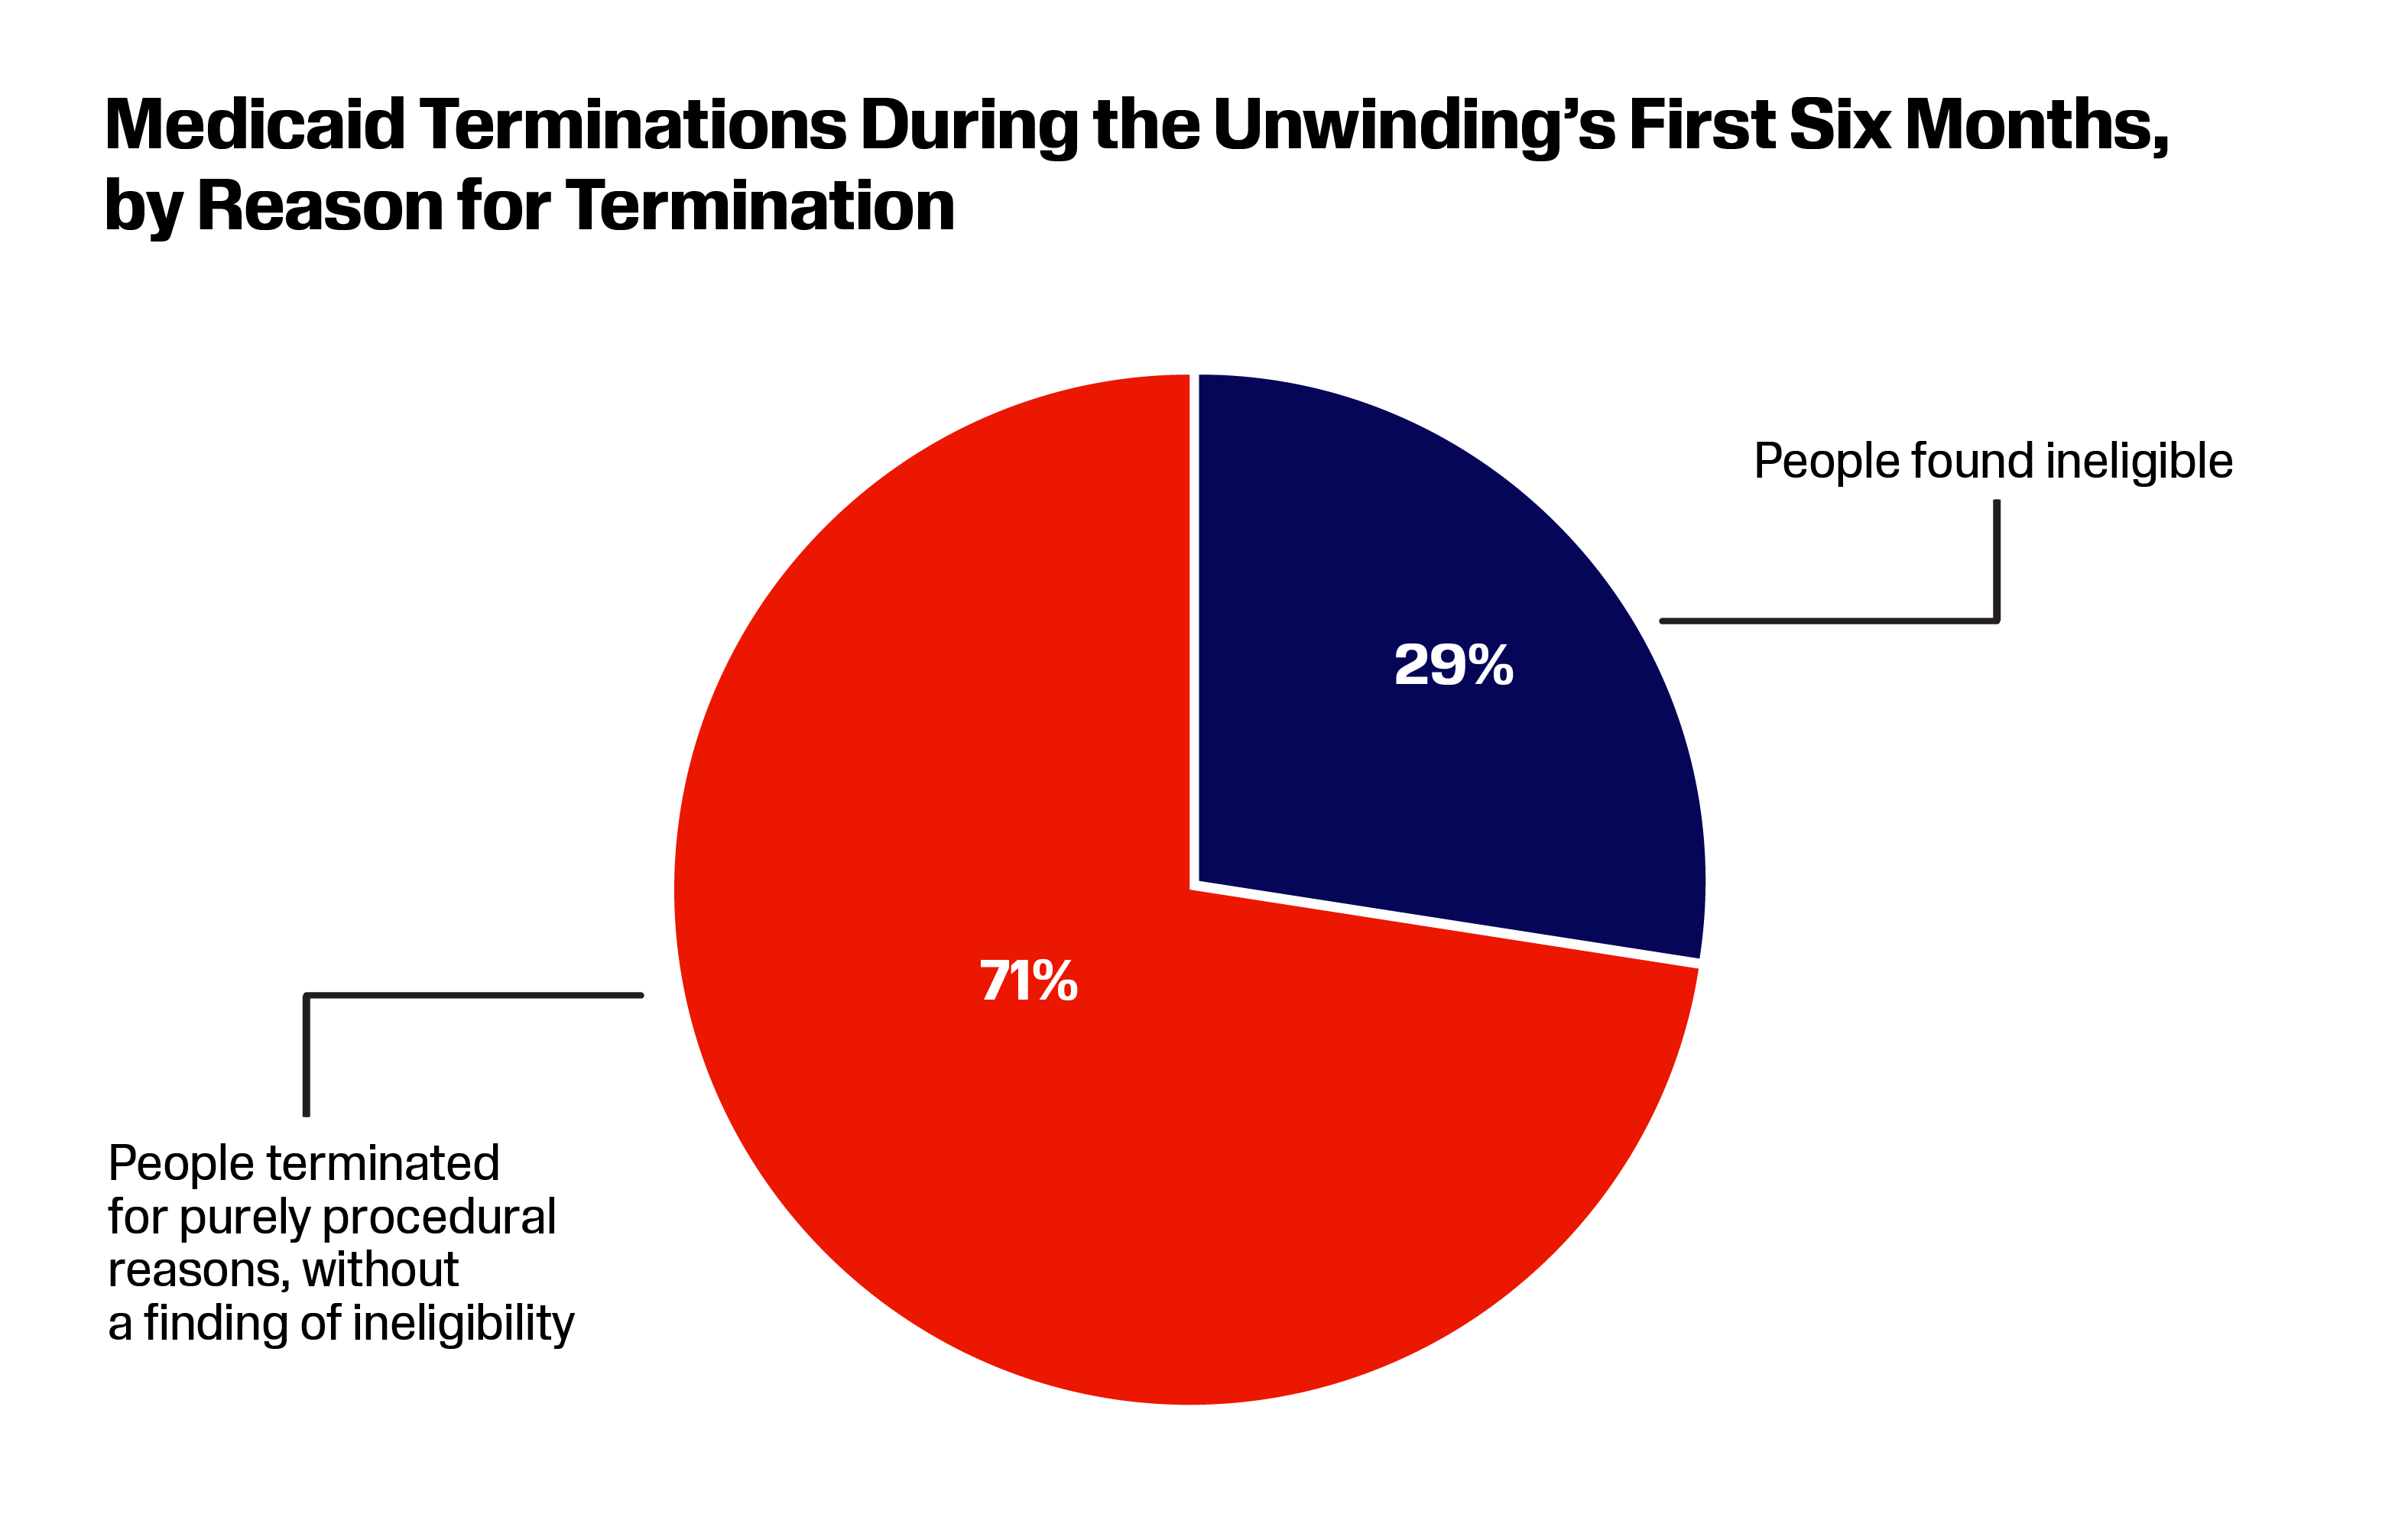 pie chart showing share of people who were terminated from medicaid for reasons other than ineligibility